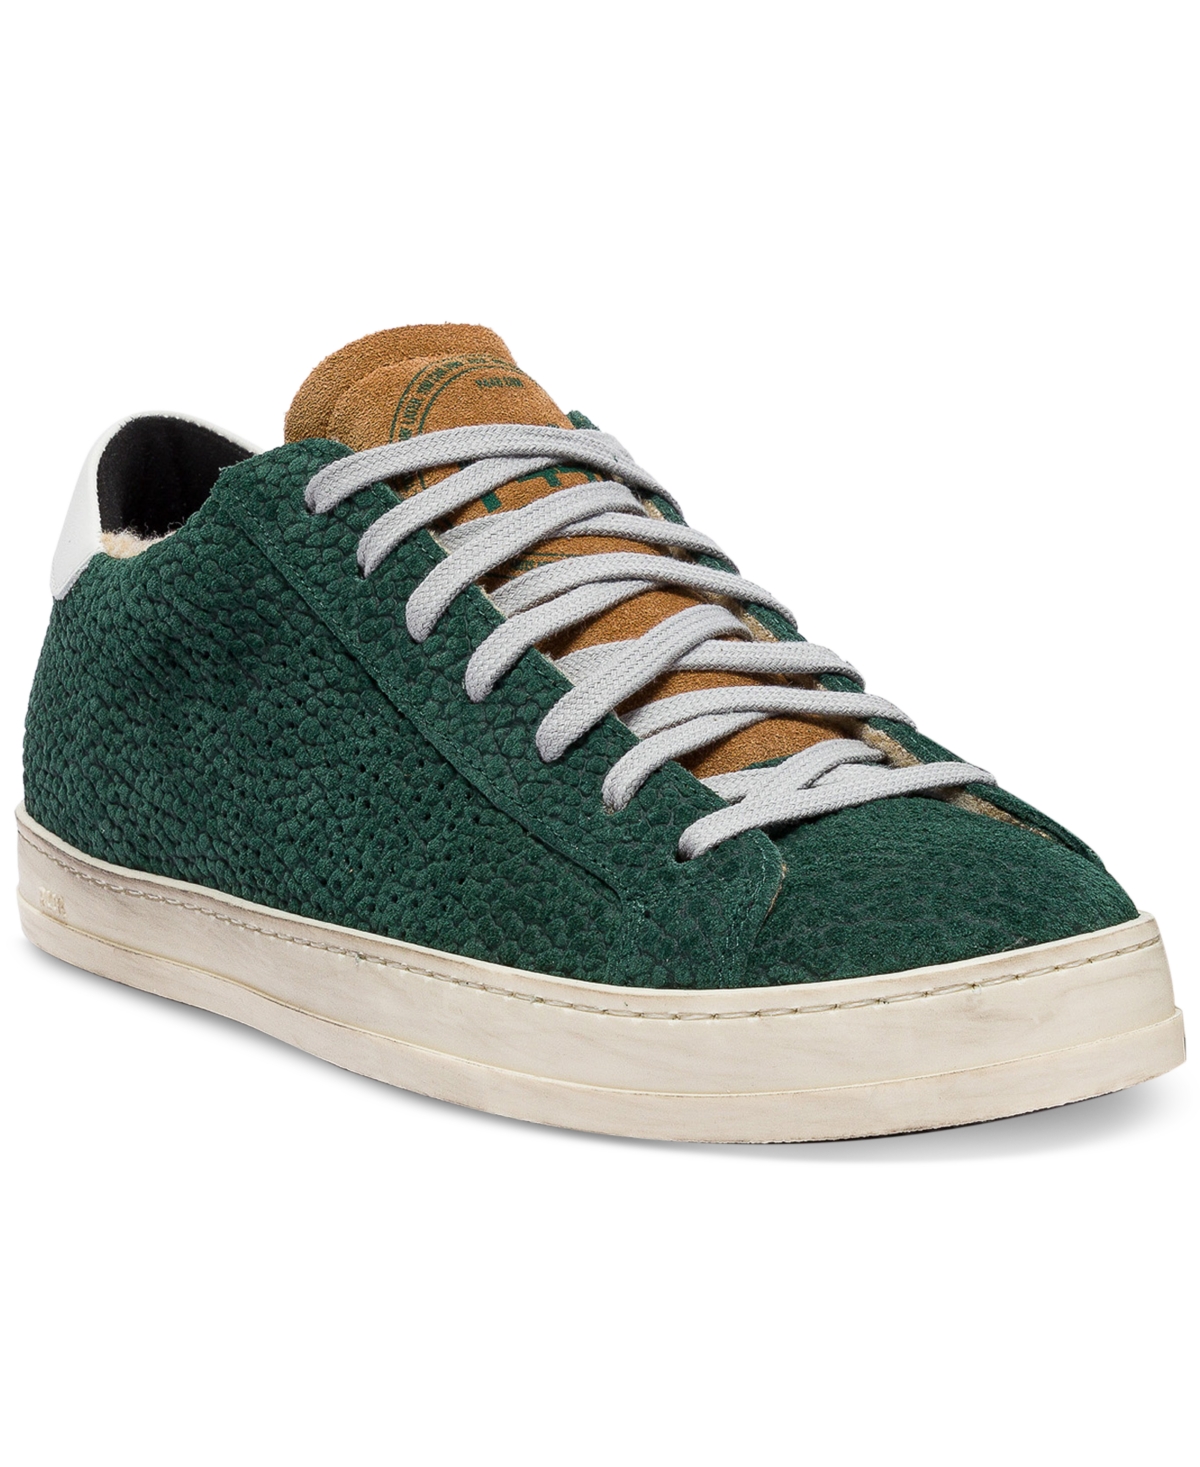 Men's Textured Leather Sneakers - Timber